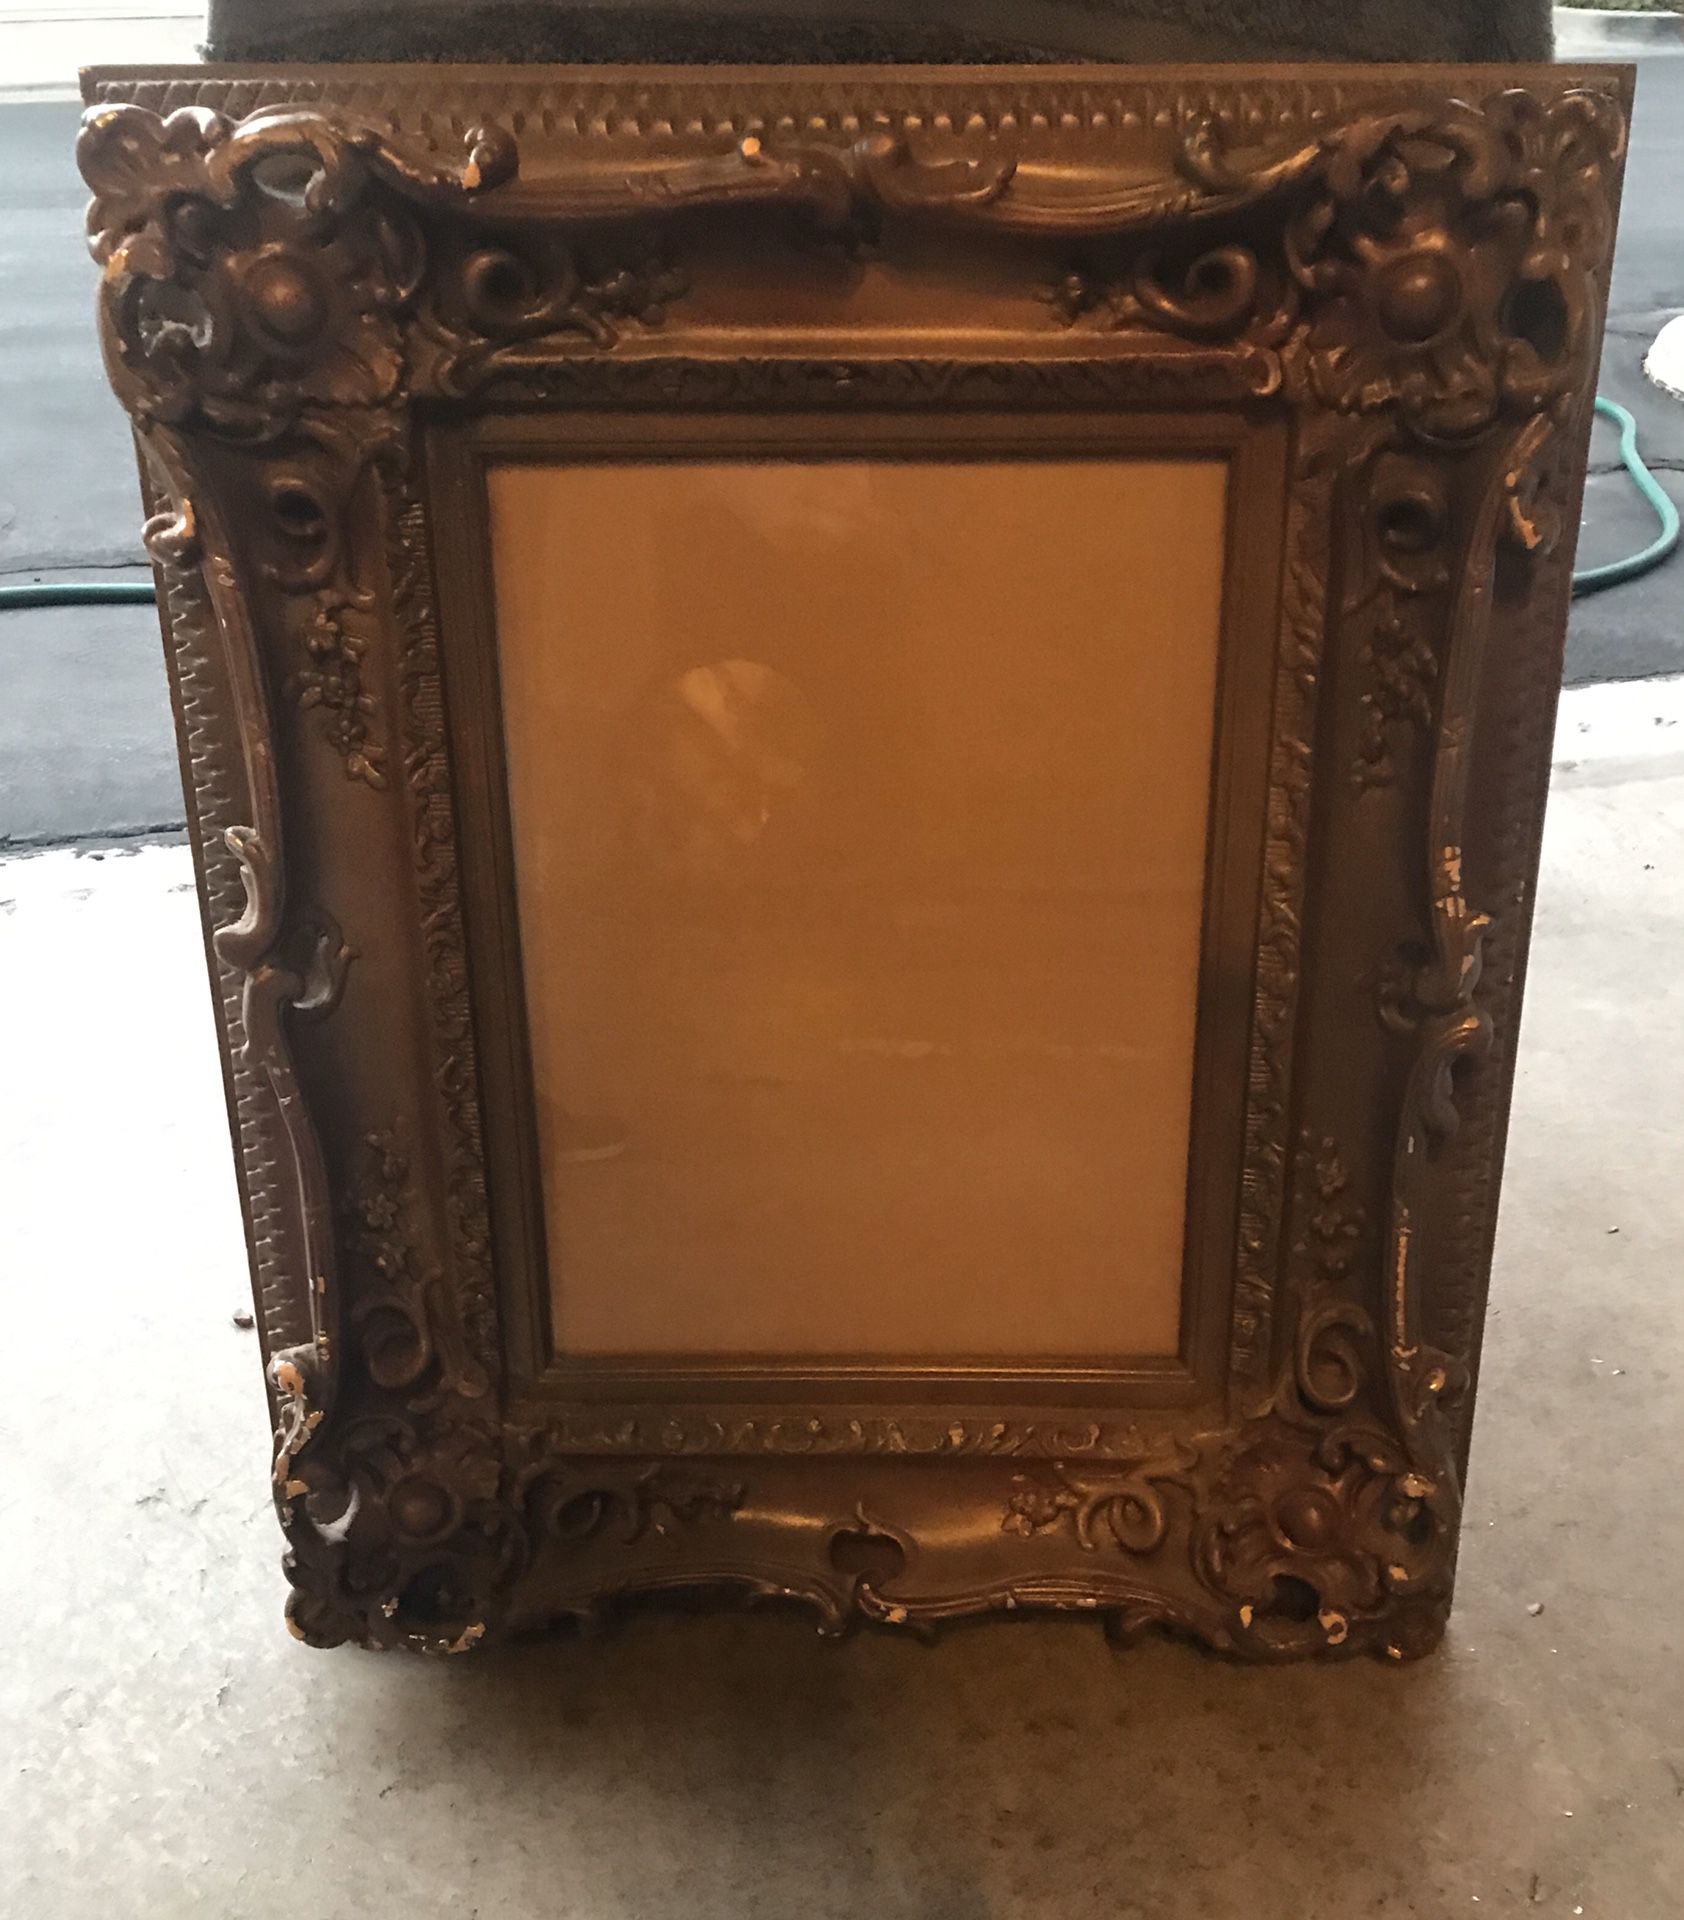 PICTURE FRAME -12” x 16”